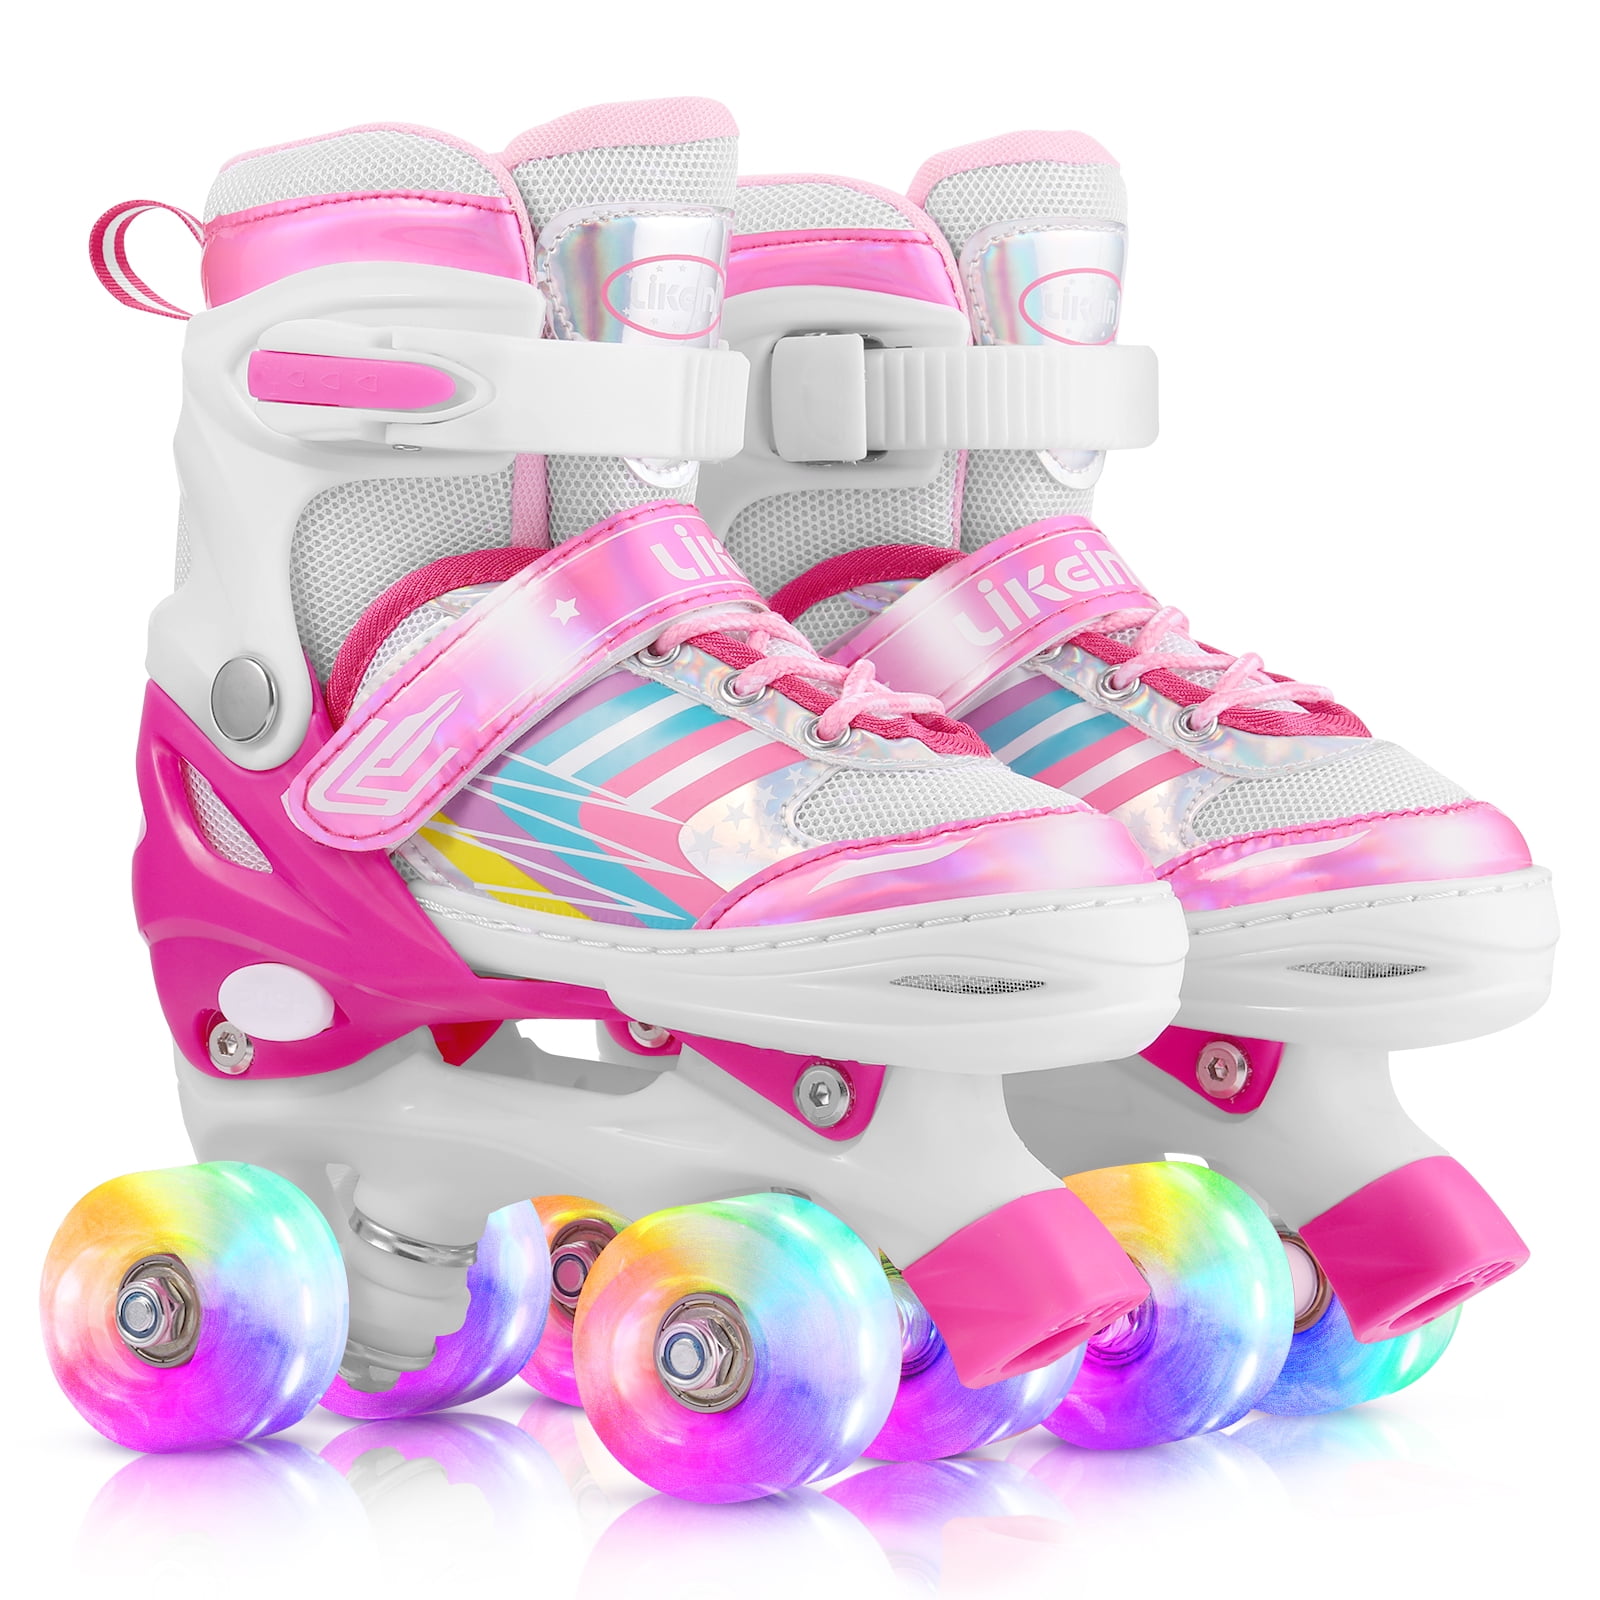 YUANYI Quad Roller Skates For Girl And Women With All Wheel Light Up,Indoor/Outdoor Lace-Up Fun Illuminating Roller Skate For Kid,Blue-L（38-42）-set1